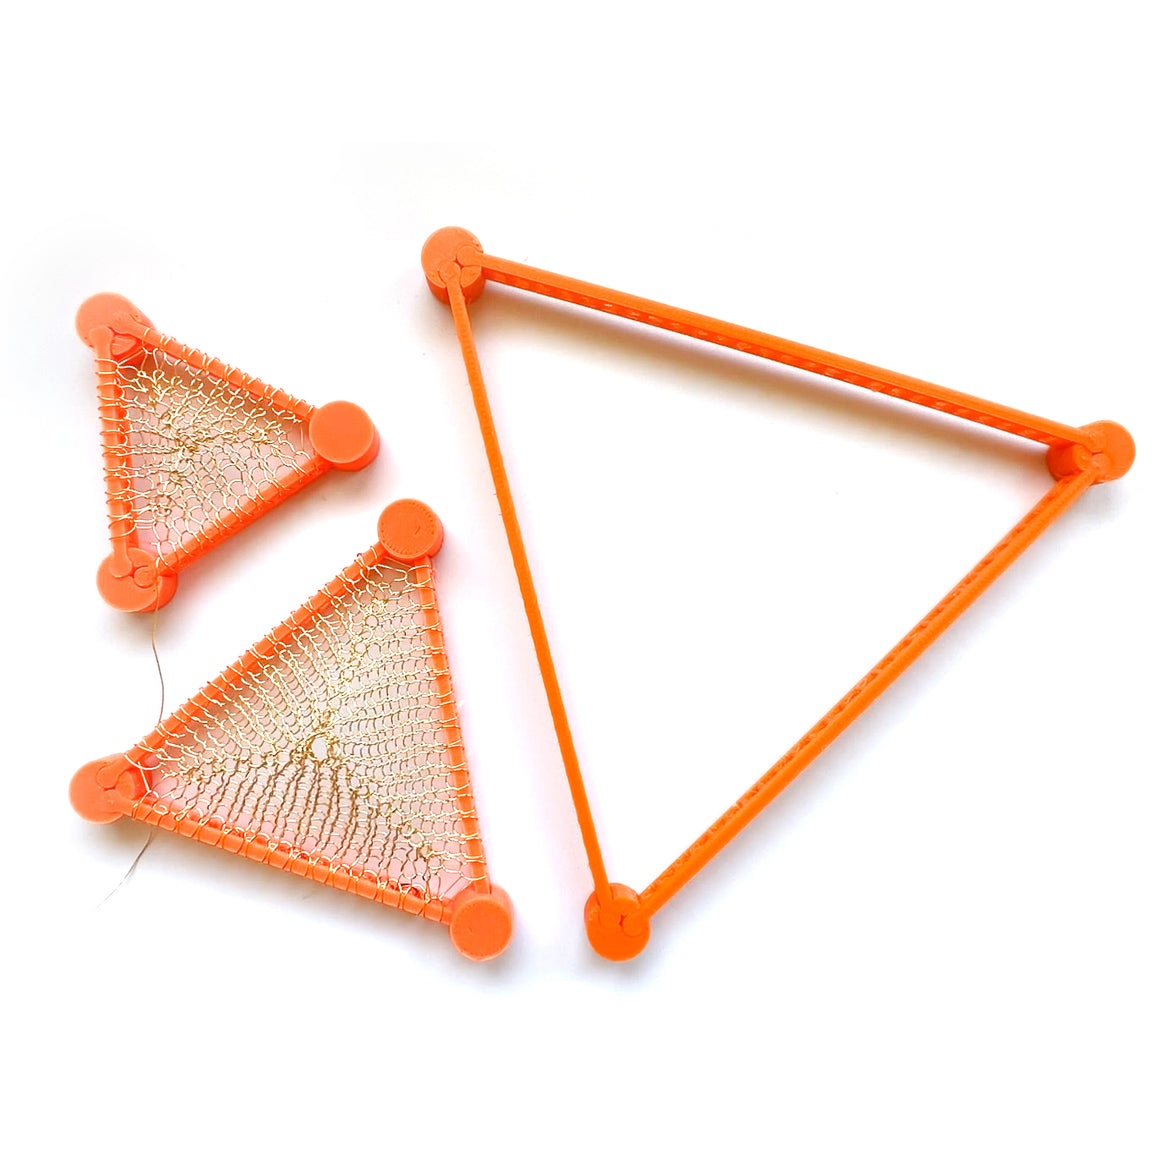 Polygon looms system, Wire crochet jewelry and home decor accessory